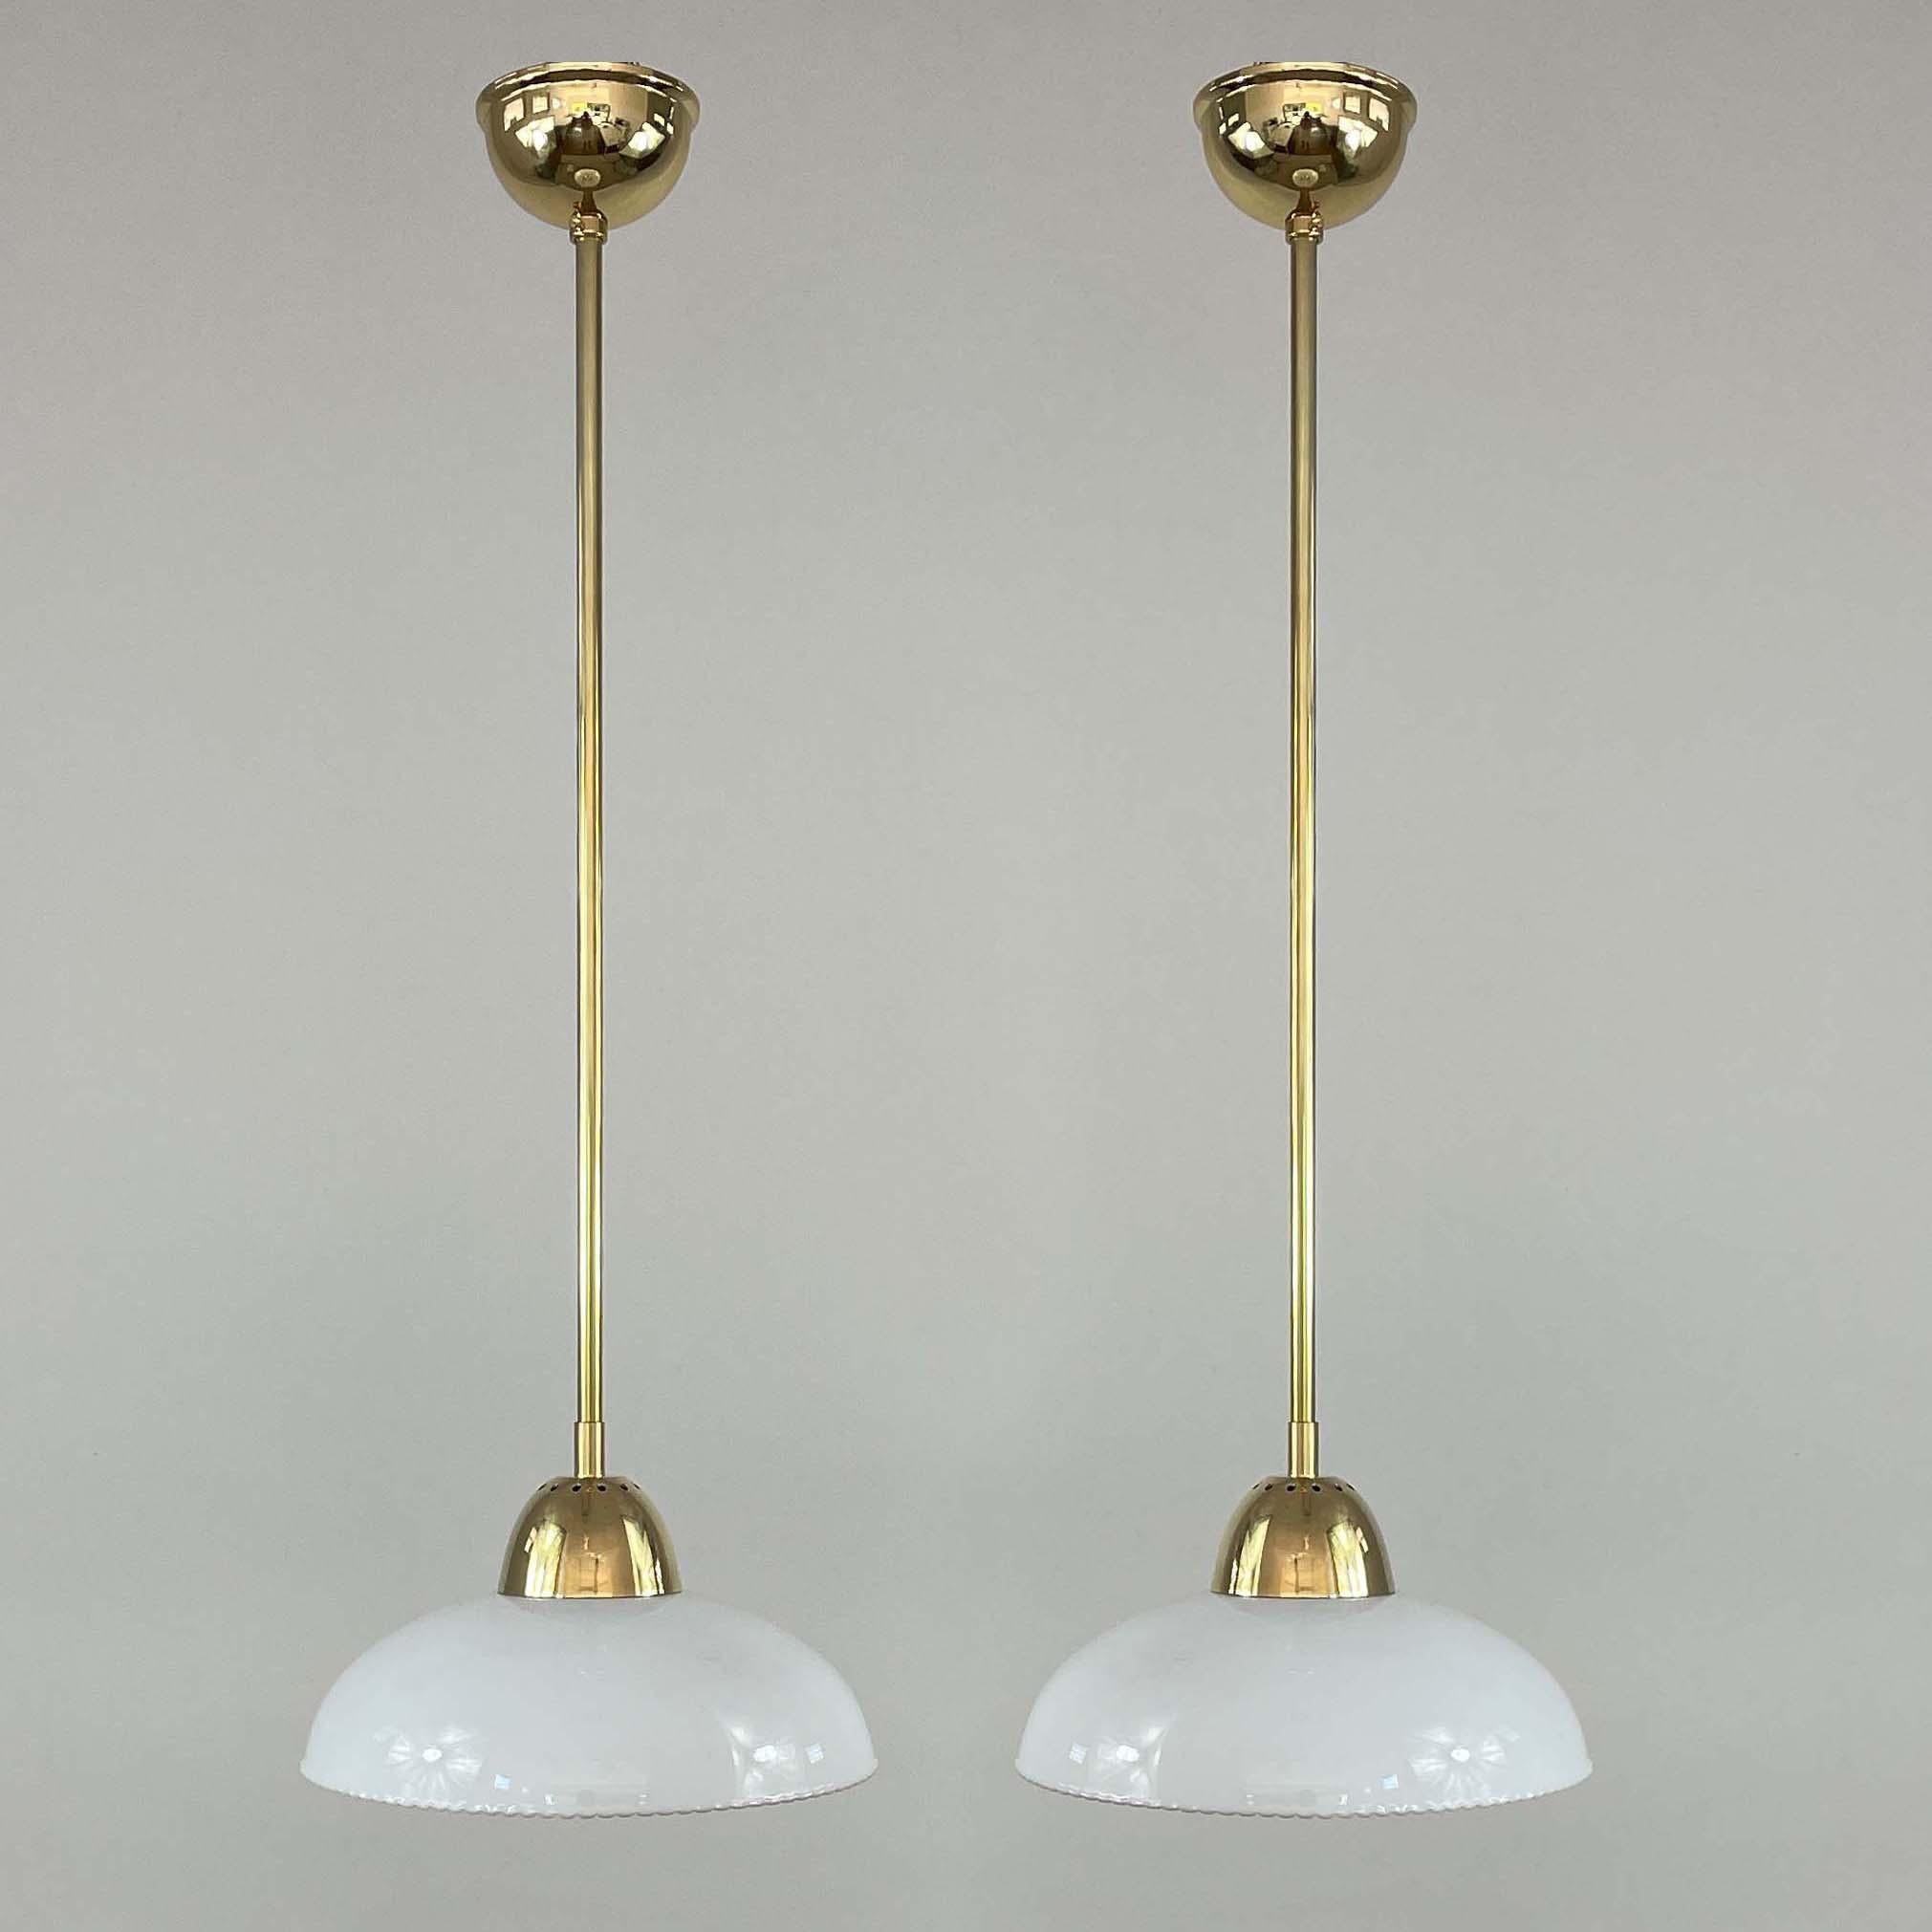 These elegant pendants were designed and manufactured in Sweden in the 1940s. The lights feature white opaline glass shades with a beaded edge and brass hardware. Good vintage condition with one E27 socket each.

The lamps have been rewired for use